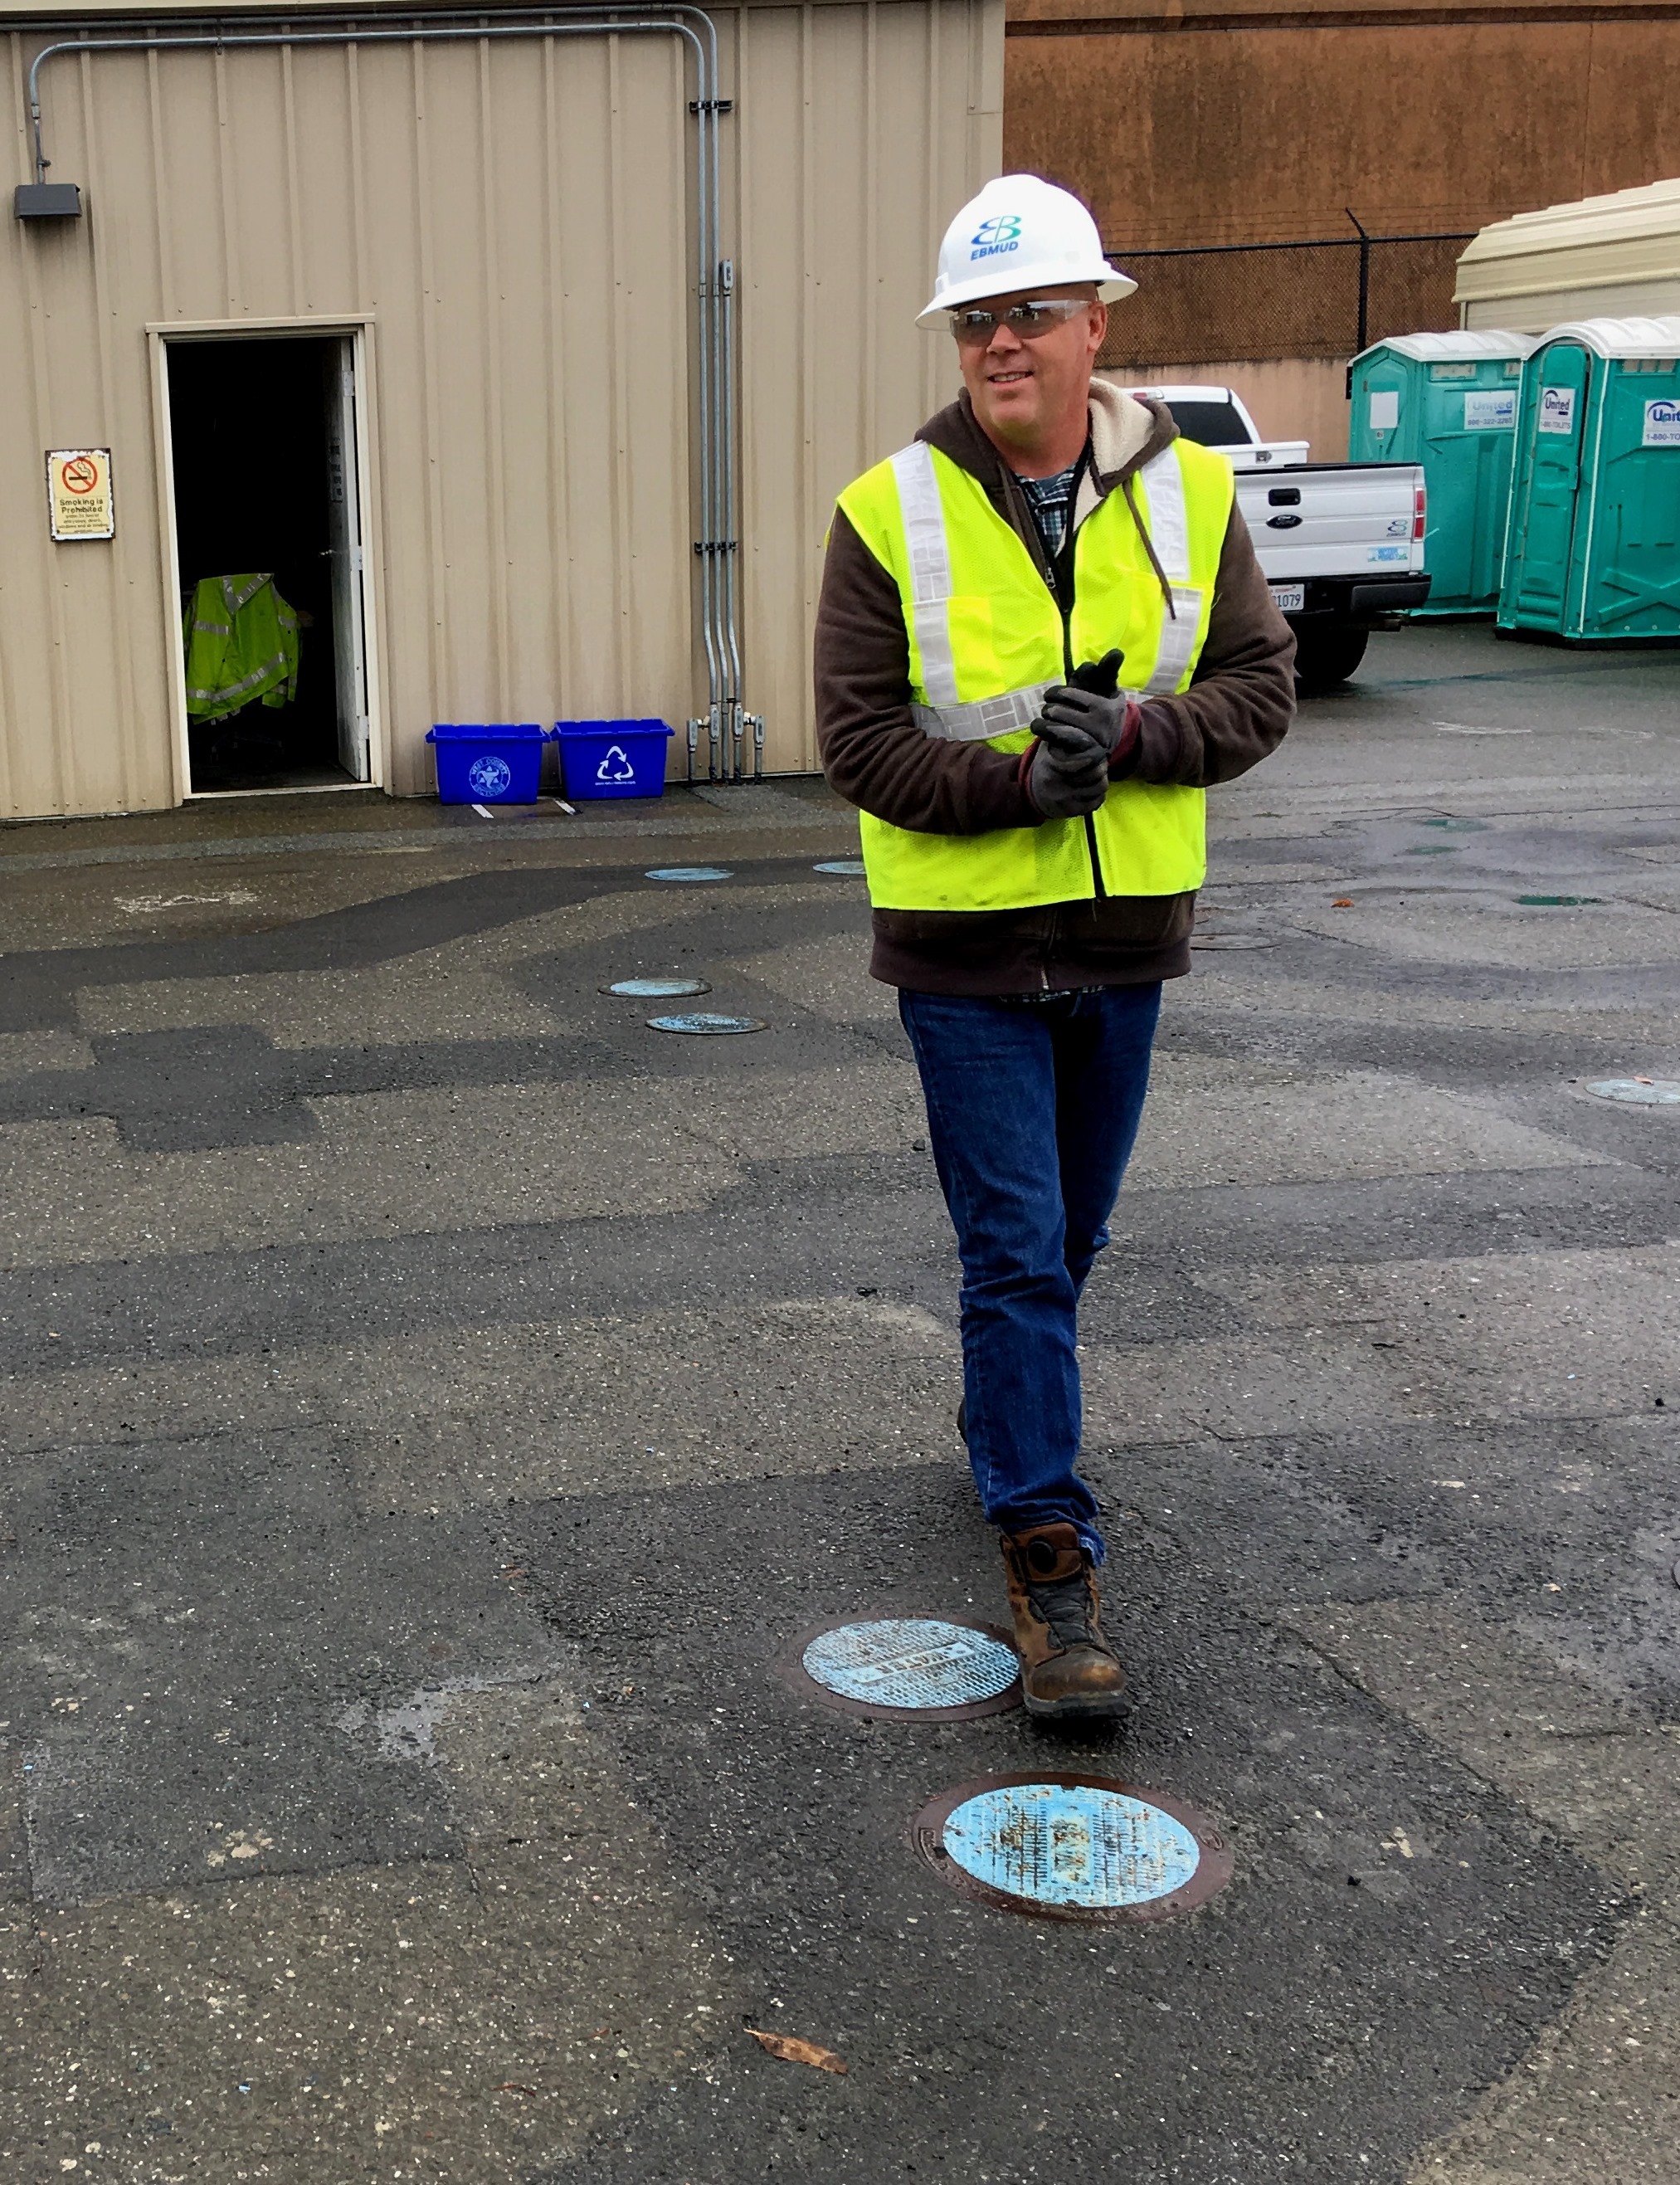 Adam oversees practice pipeline installations which have left a maze of pavement patches outside the academy.